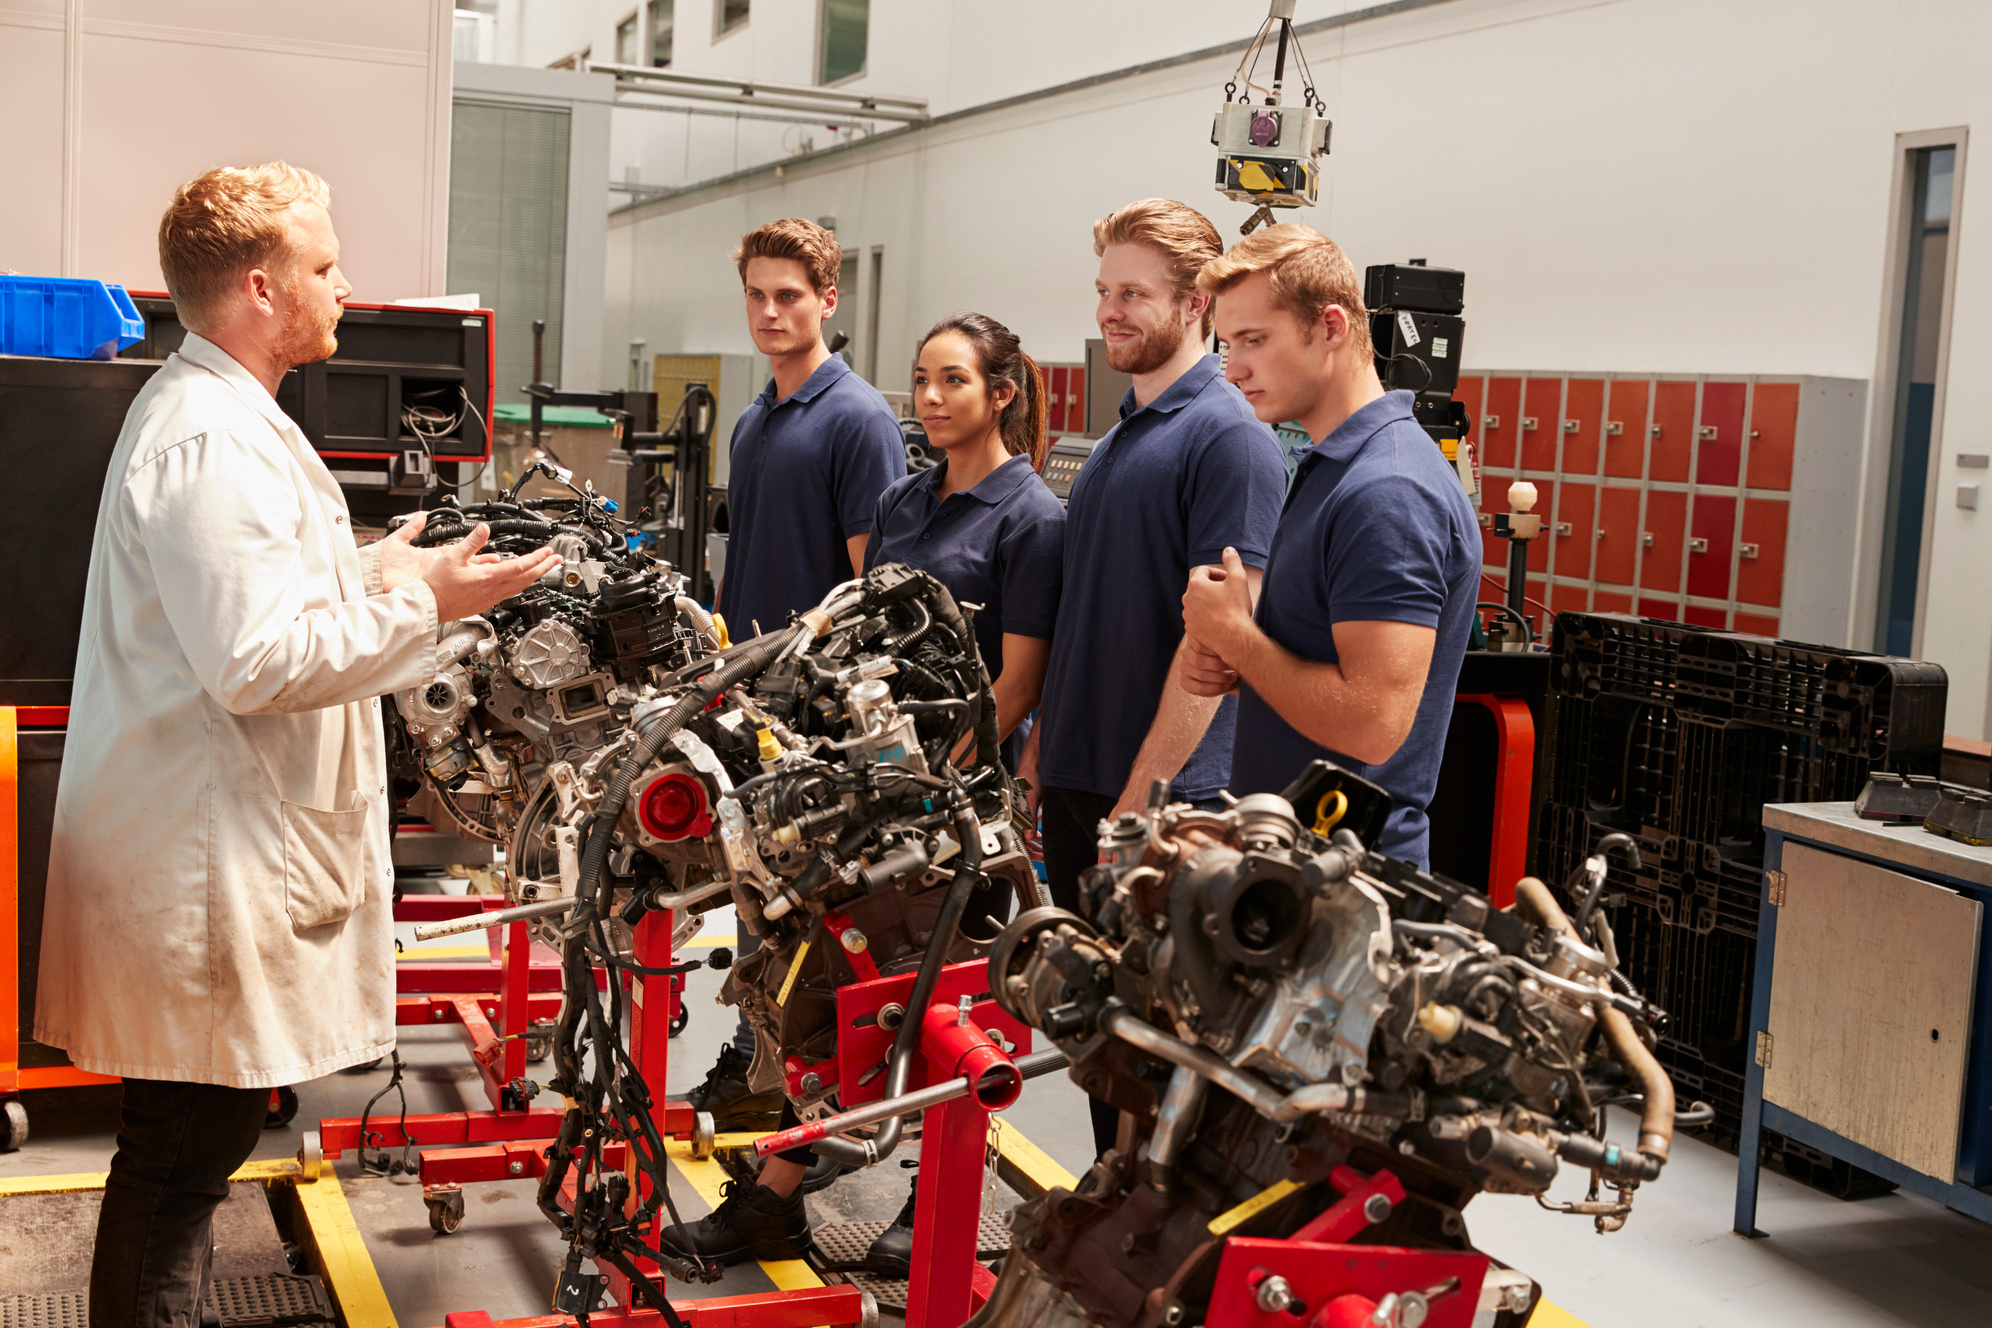 Apprentices Studying Car Engines with a Mechanic